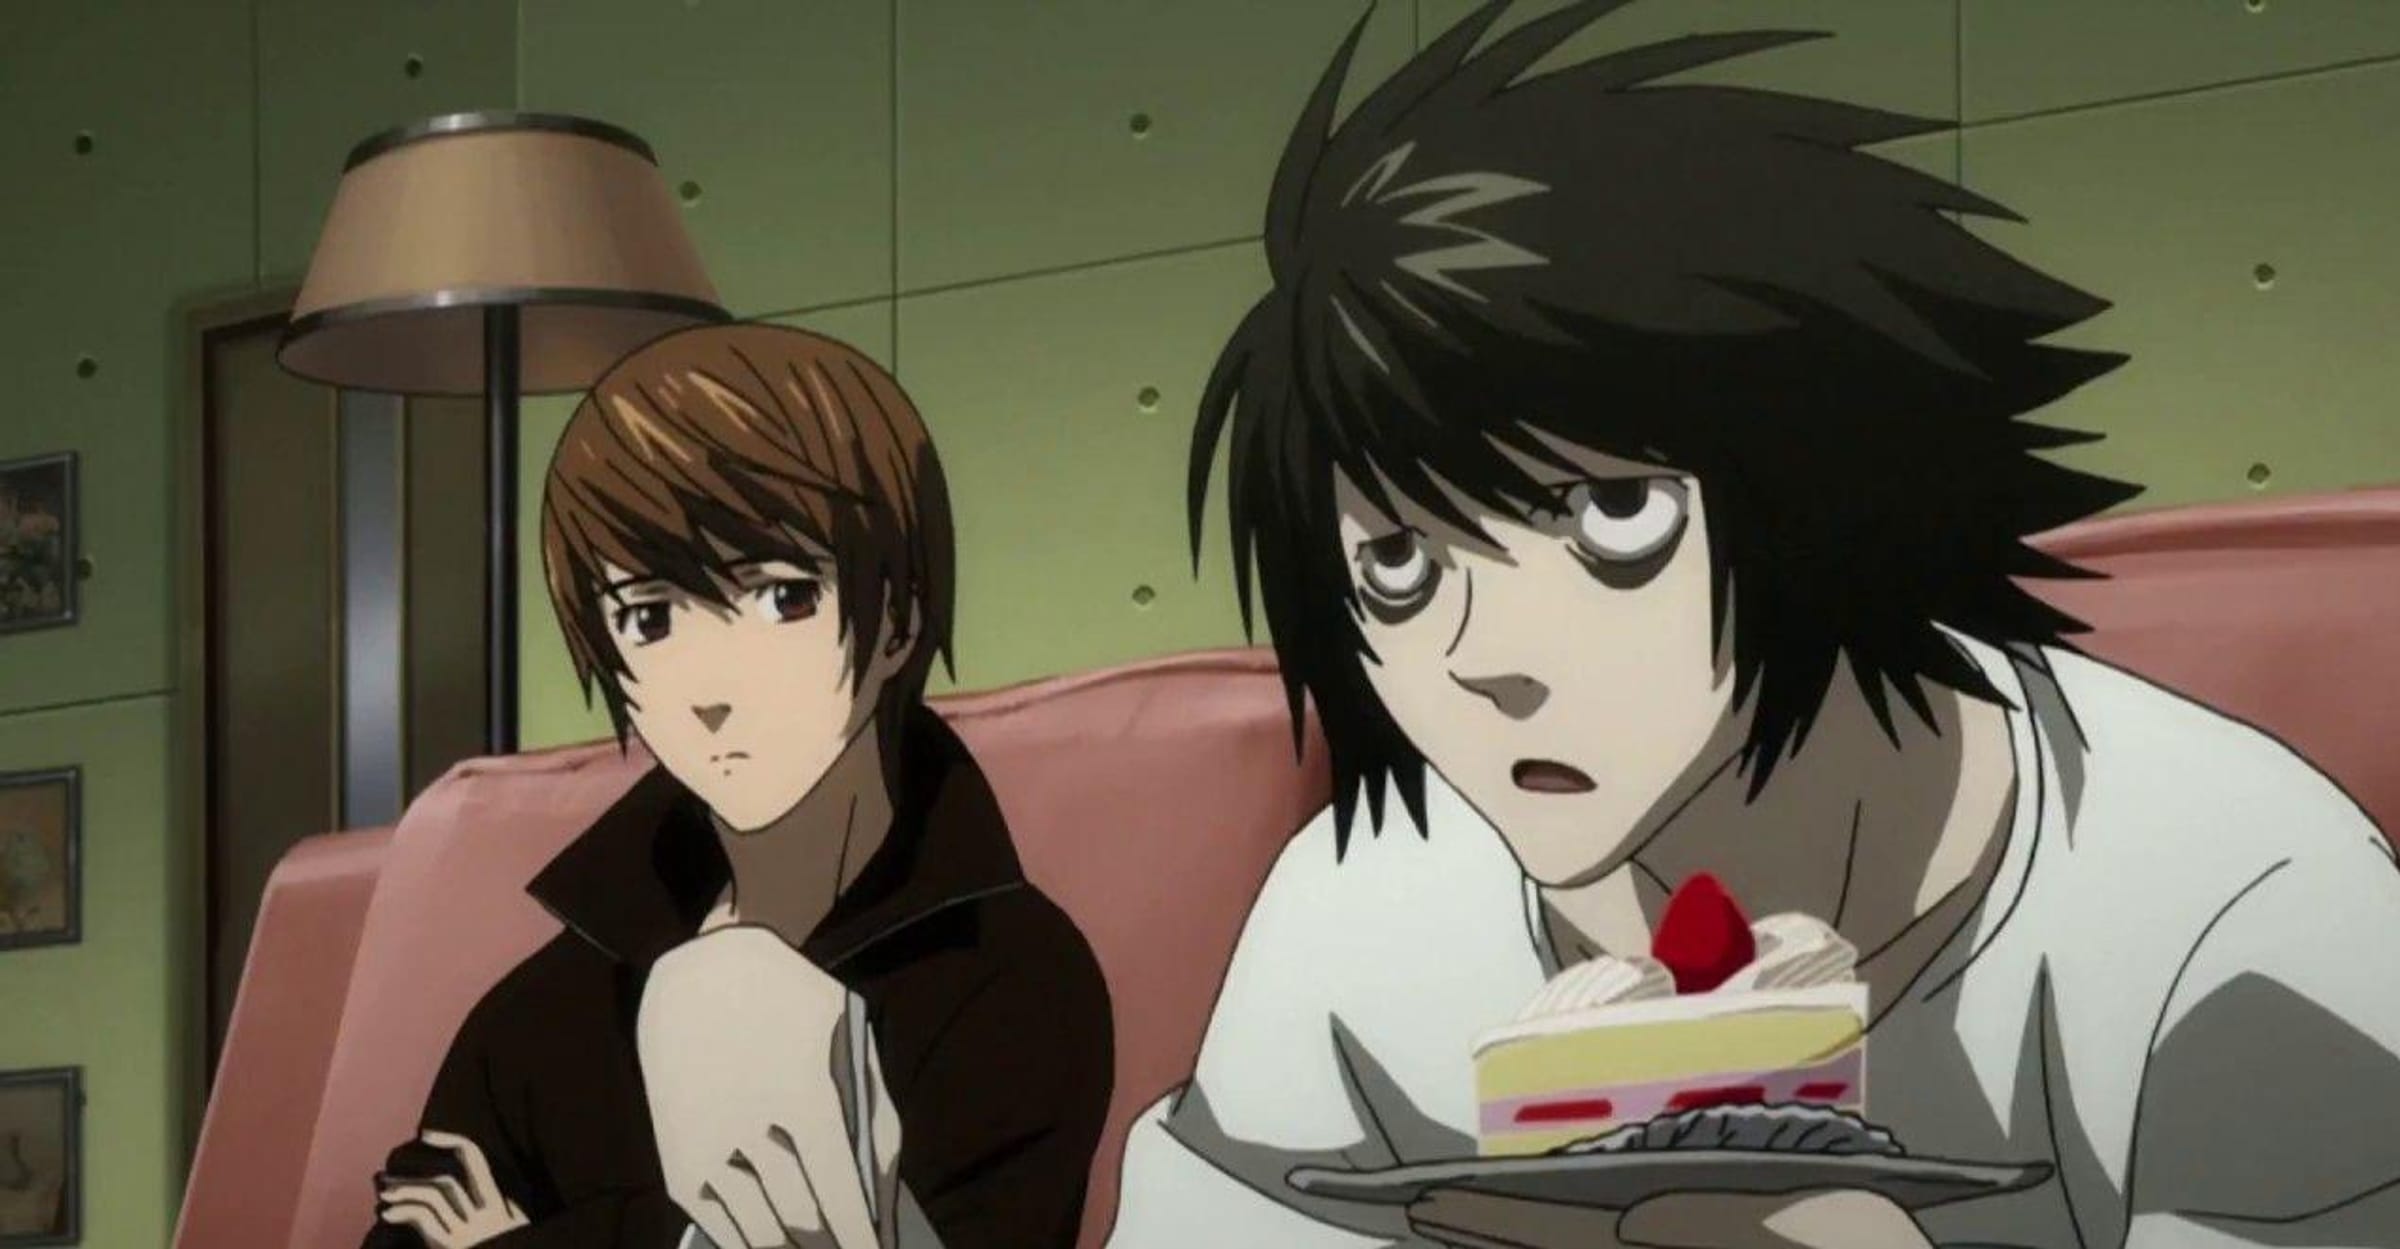 What are the main differences between Death Note's manga vs anime